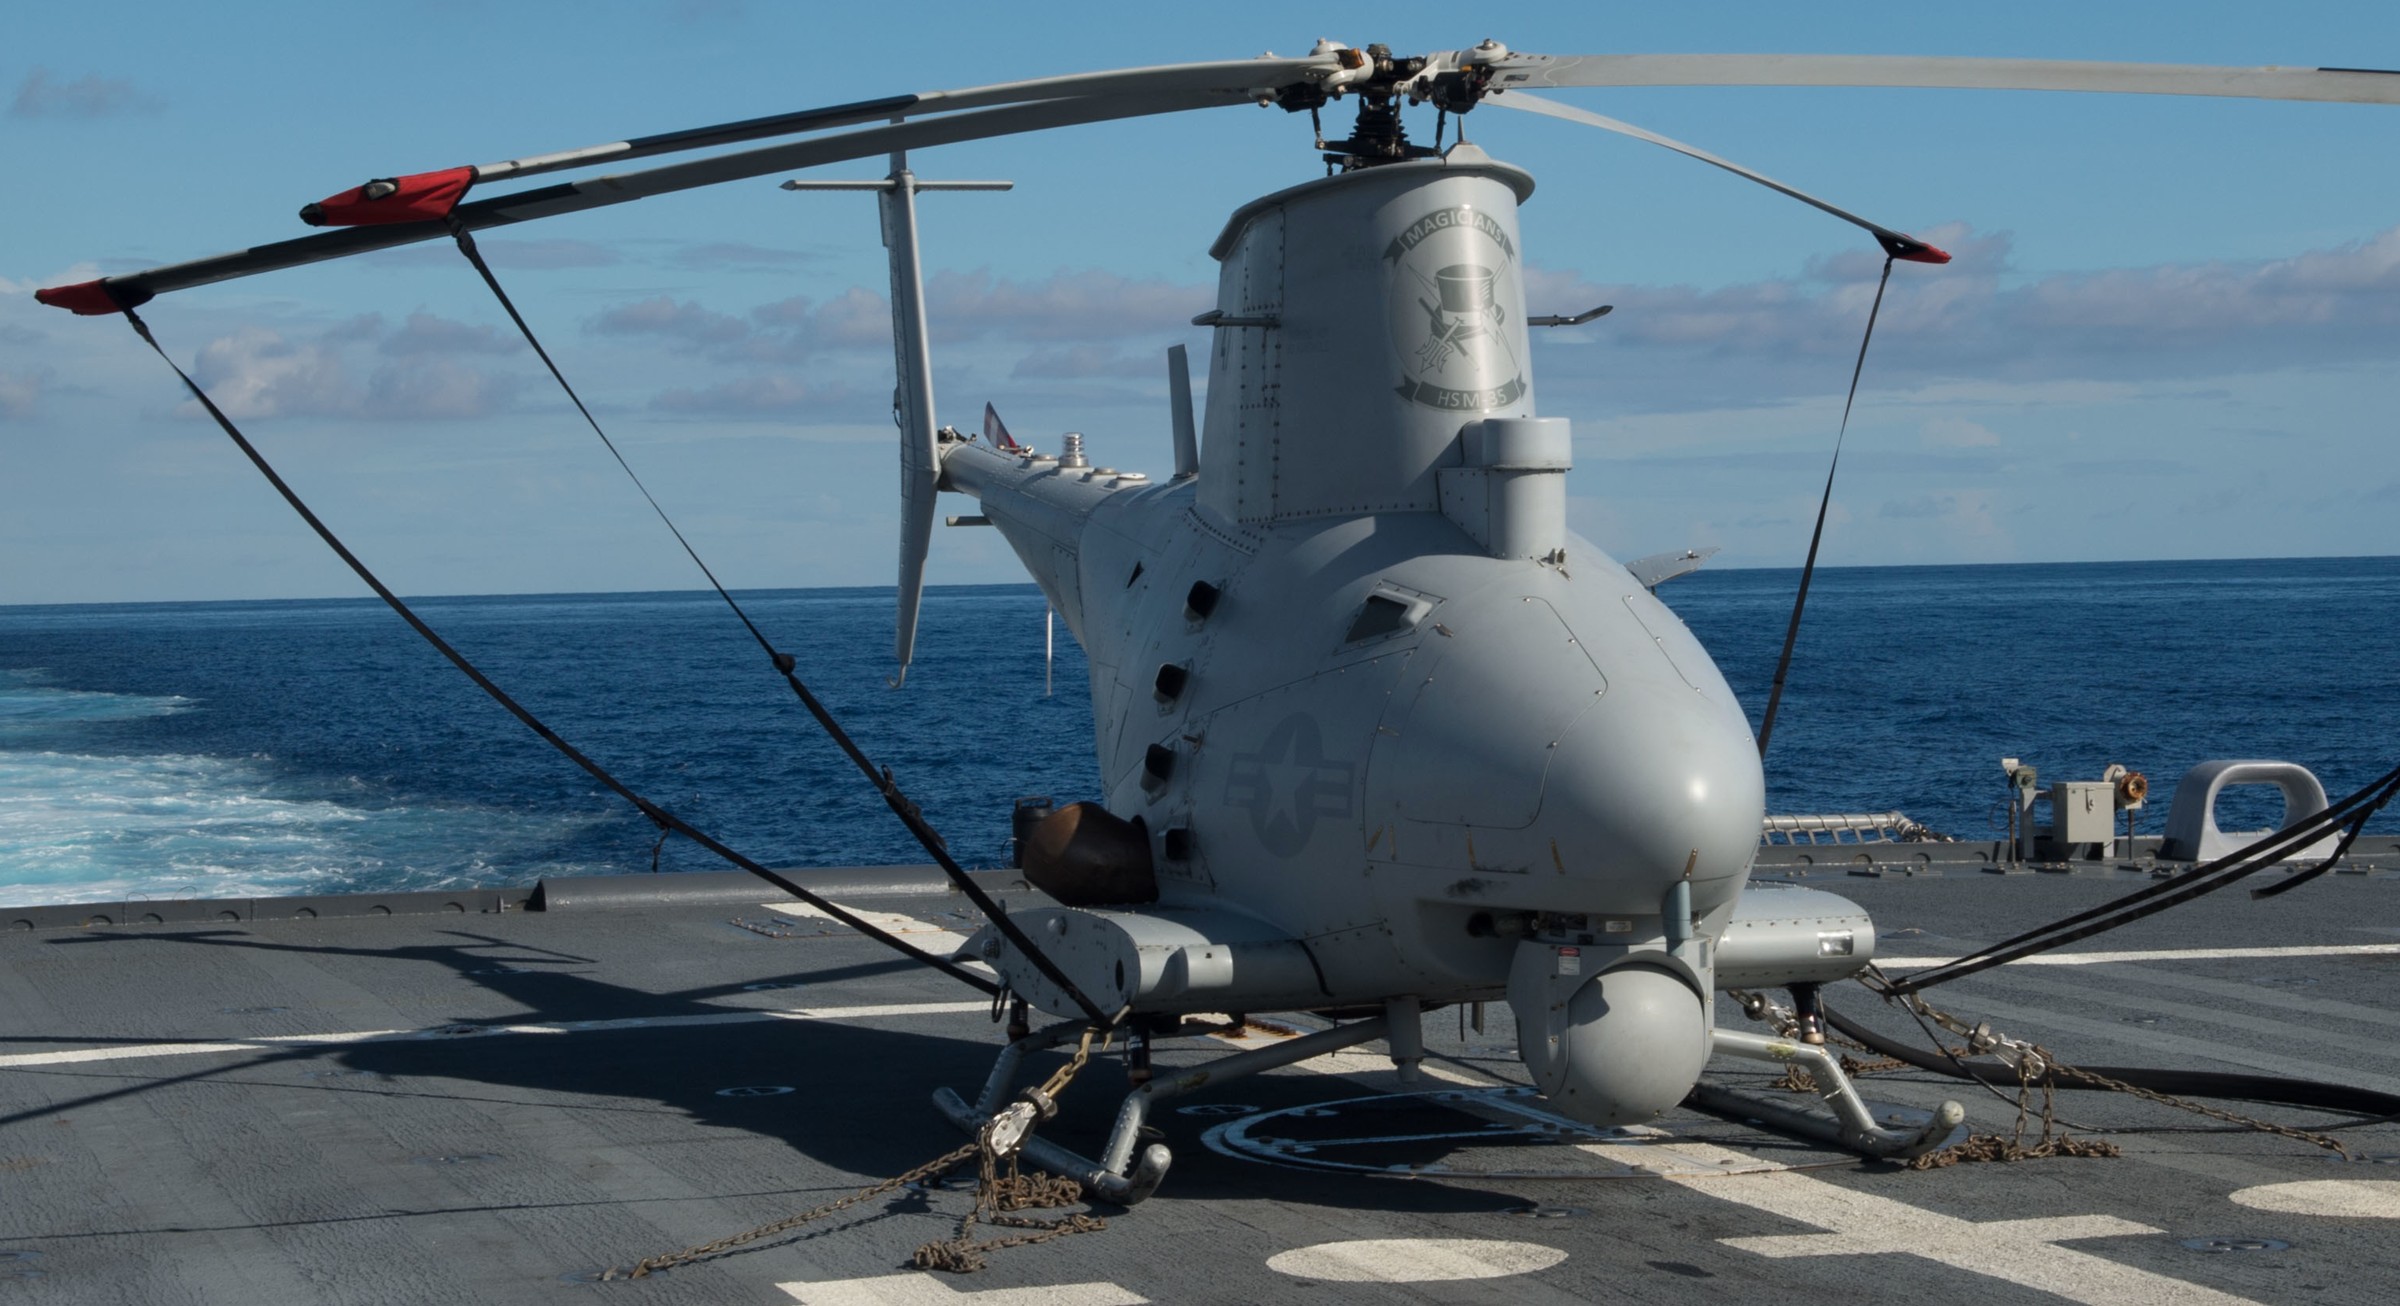 hsm-35 magicians helicopter maritime strike squadron mq-8b fire scout uav 23